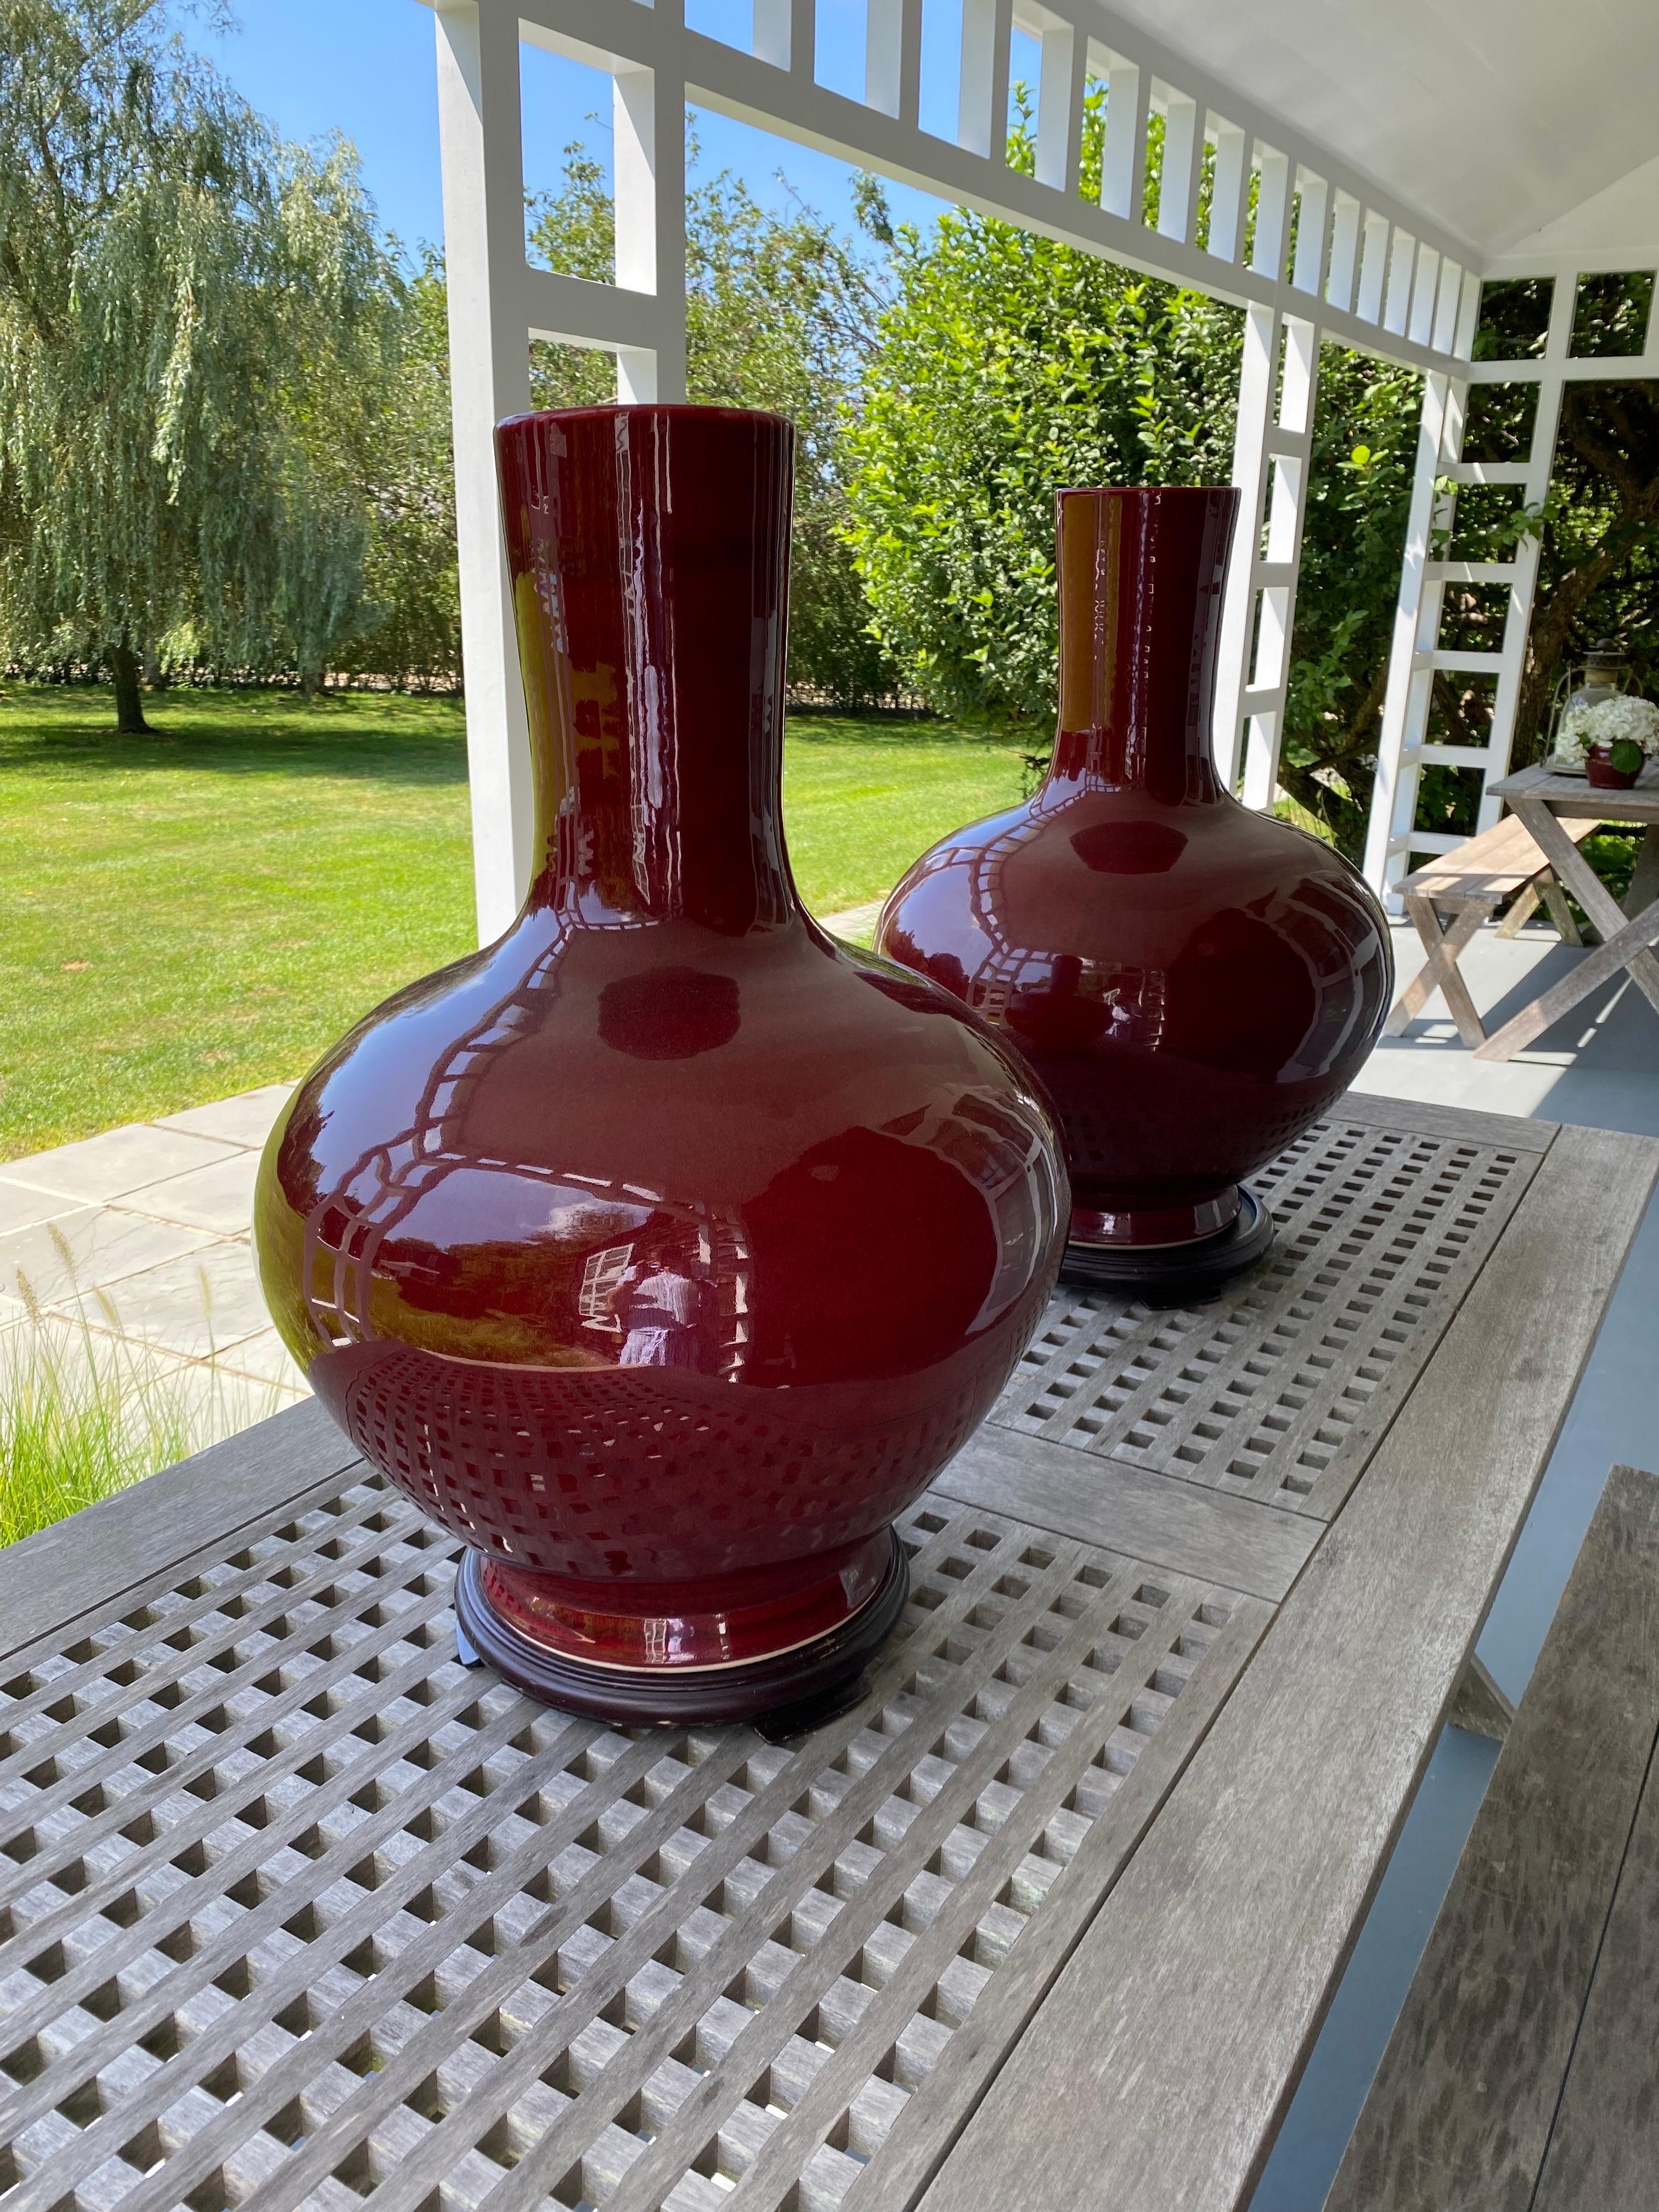 Pair of Chinese Large Sang-de-Boeuf glazed red vases, early 20th century on Wood Plinths. Round bulbous form with an elegant clean neck sat on a wooden plinths and glazed in deep red glaze. Also called flambé glaze, a glossy, rich, blood red glaze